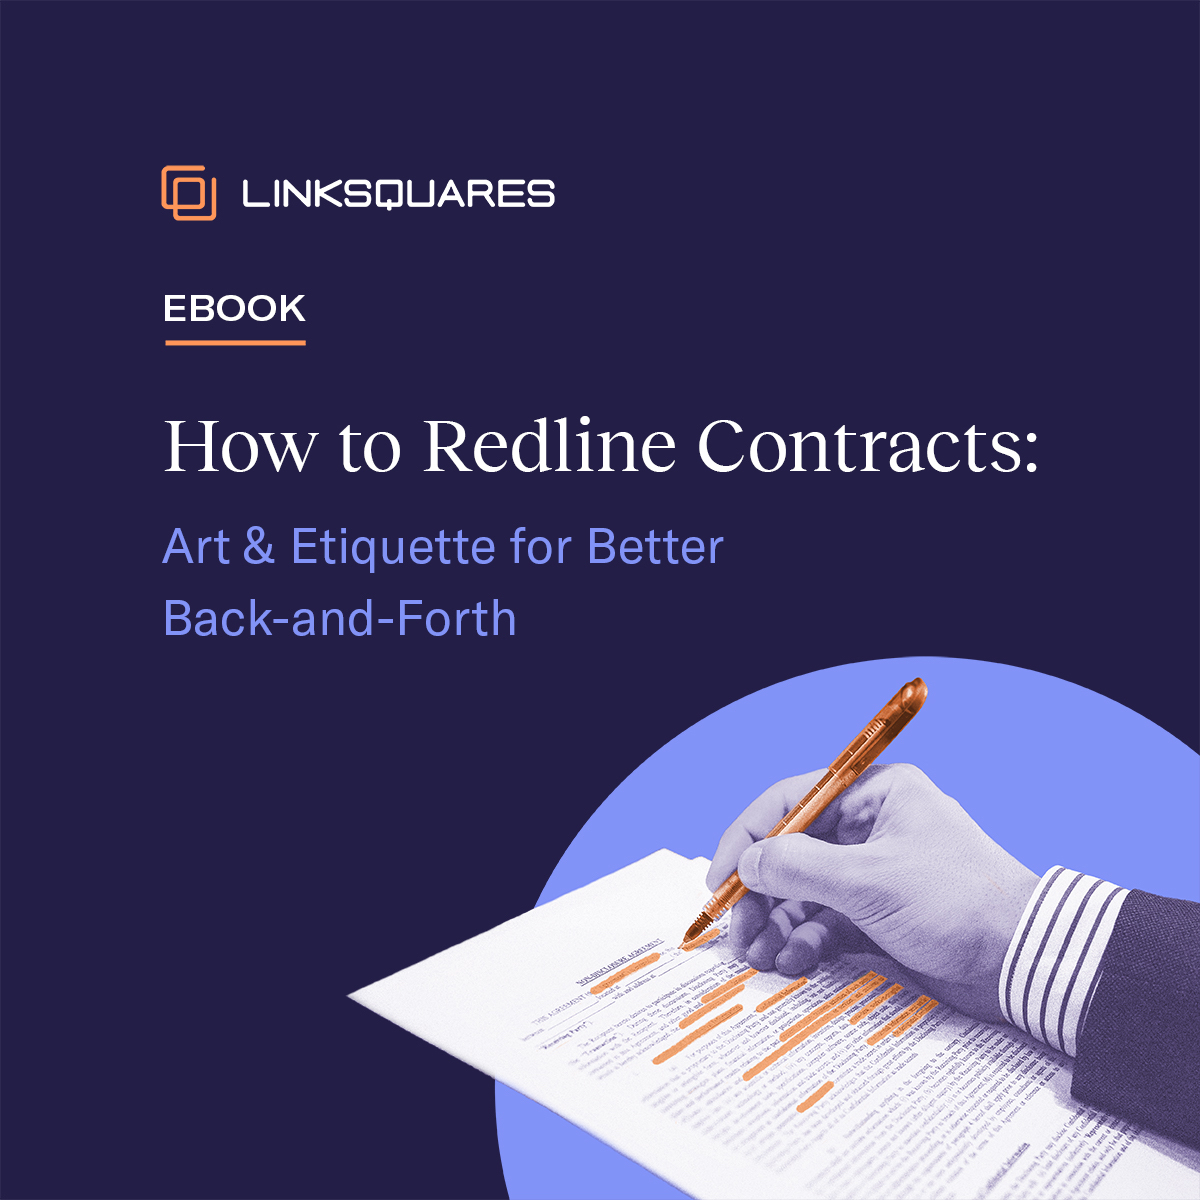 How to Redline Contracts: Art & Etiquette for Better Back-and-Forth